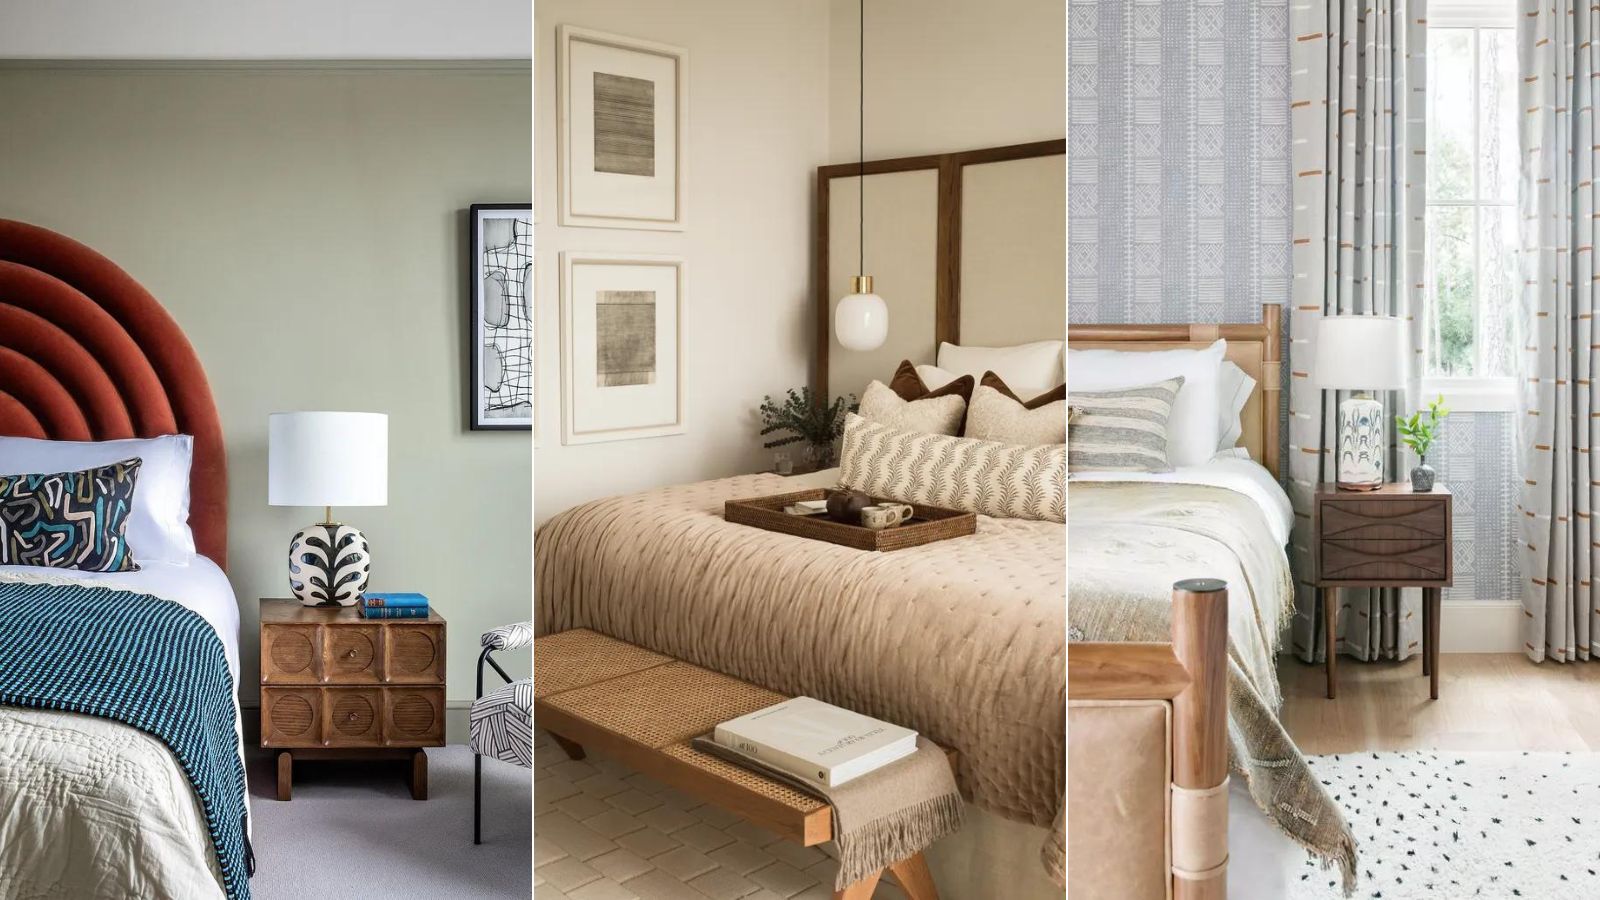 5 'quiet luxury' bedrooms that look expensive and calm